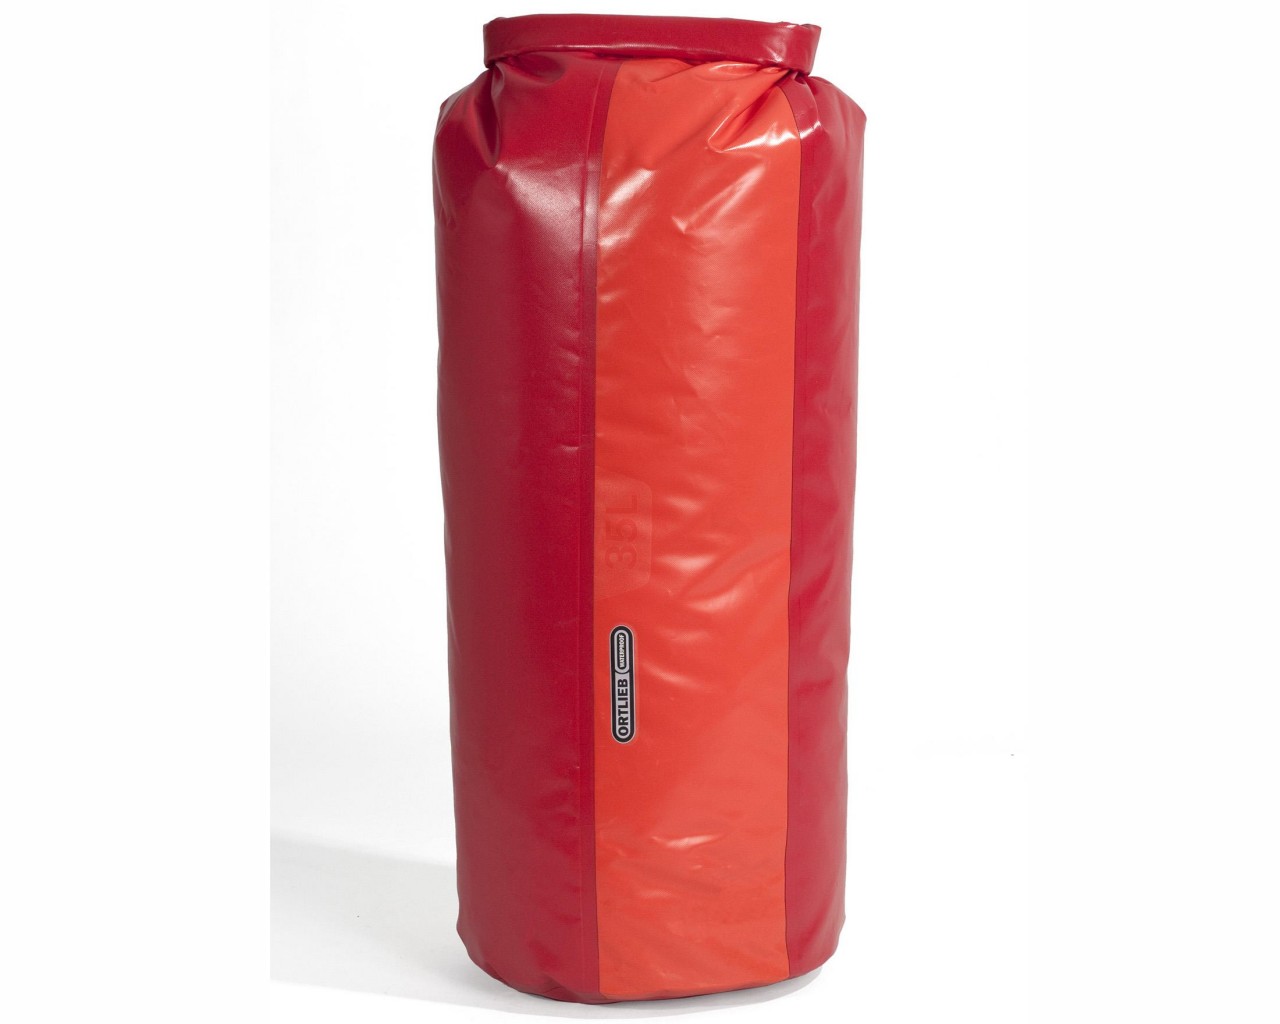 Ortlieb Packsack PD350 - 35 liter | cranberry-signalrot